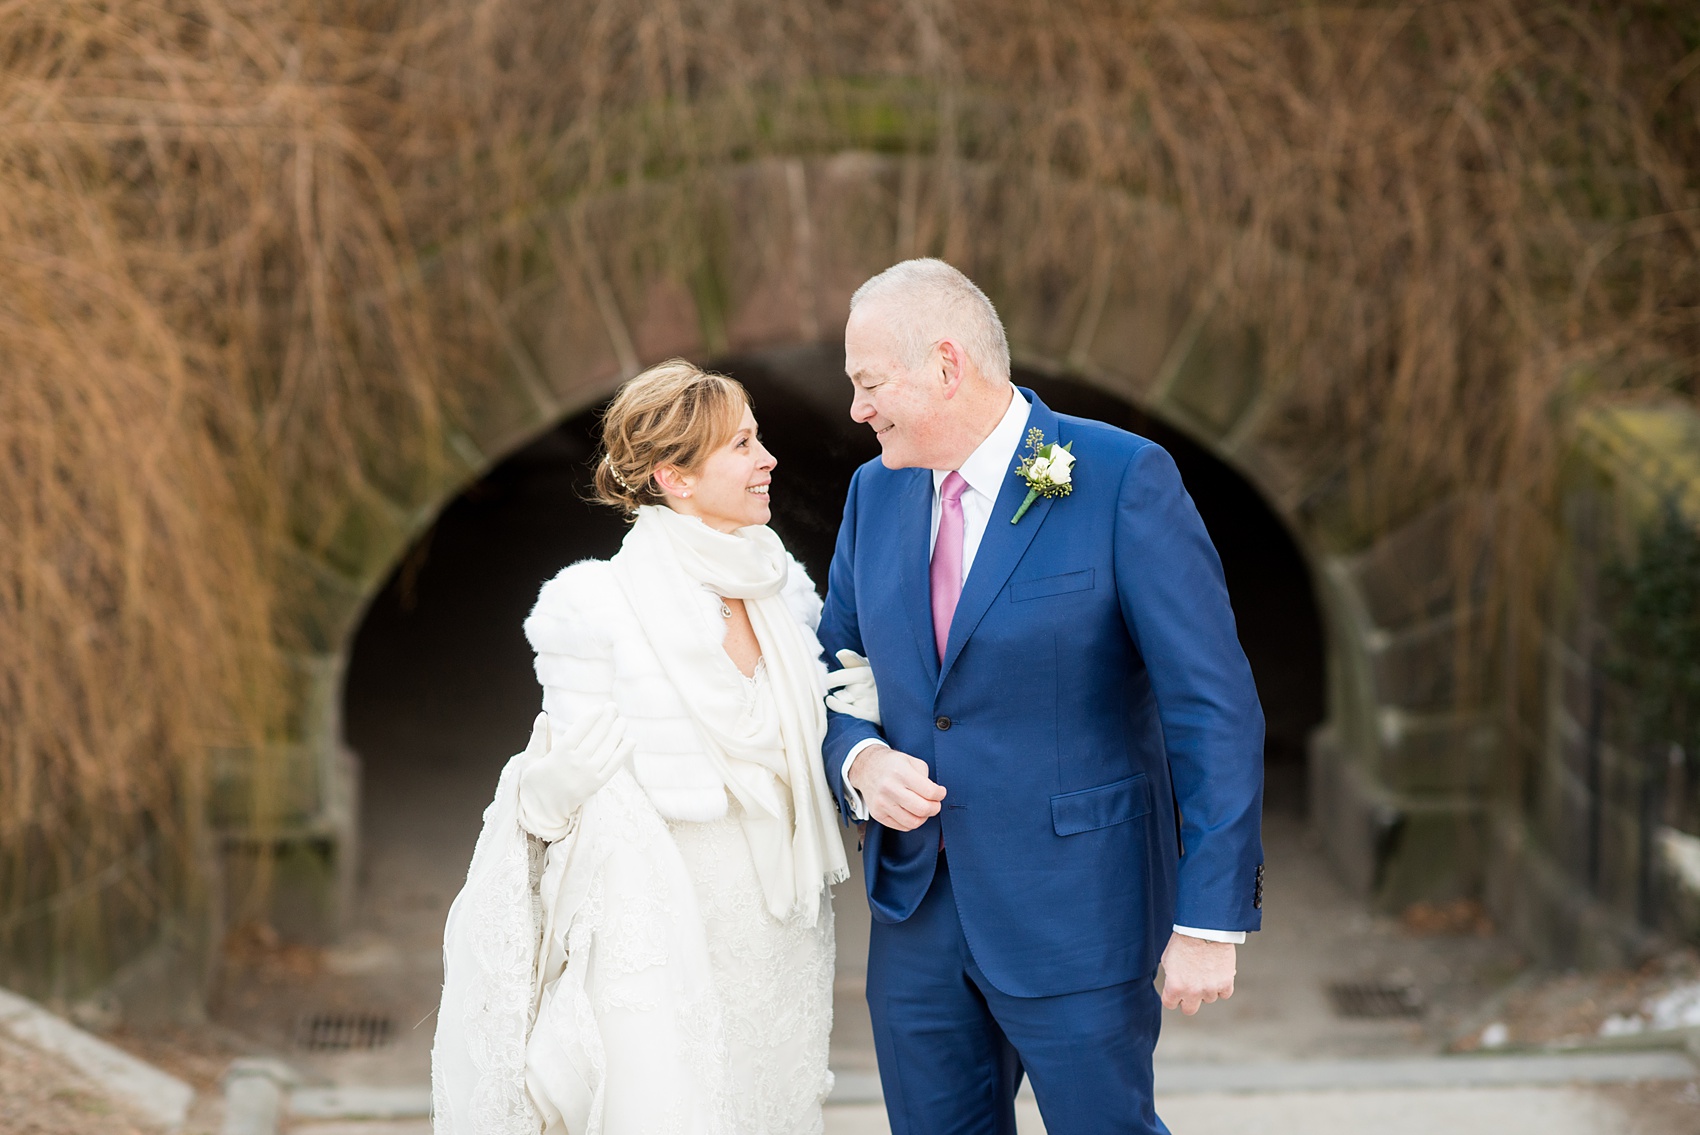 Photos by Mikkel Paige Photography of a Central Park Wedding ceremony and reception at the Loeb Boathouse venue with a romantic winter theme. The bride and groom took pictures around the park in his custom navy blue suit and her lace gown with short white fur coat. Click through for more images from their day! #CentralParkWedding